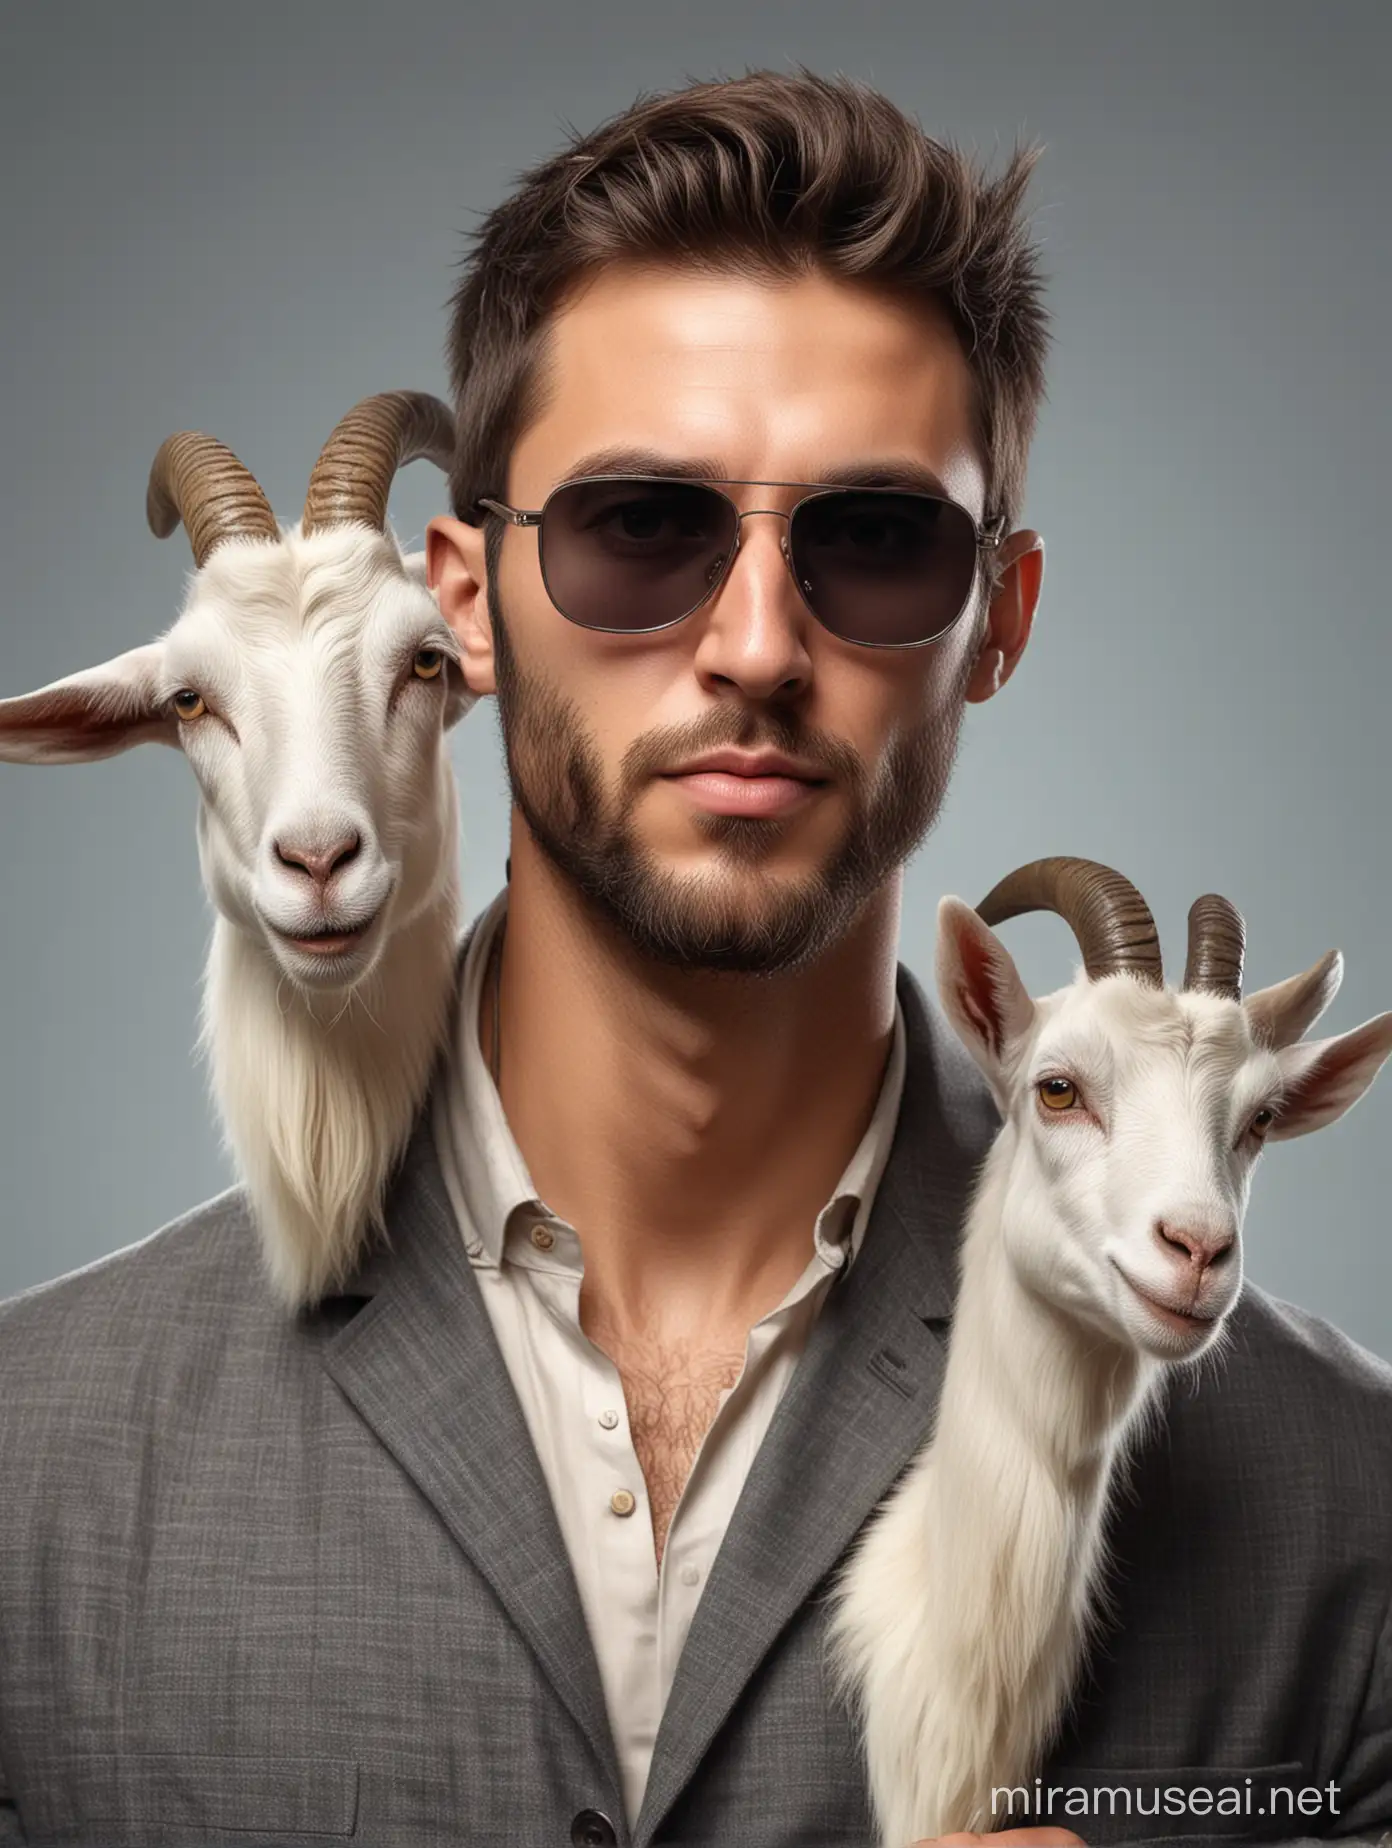 Create a man and goat mixed image face, head with goat horn, close up image with mix gesture, wear sunglass, realistic, side angle but focused, hd